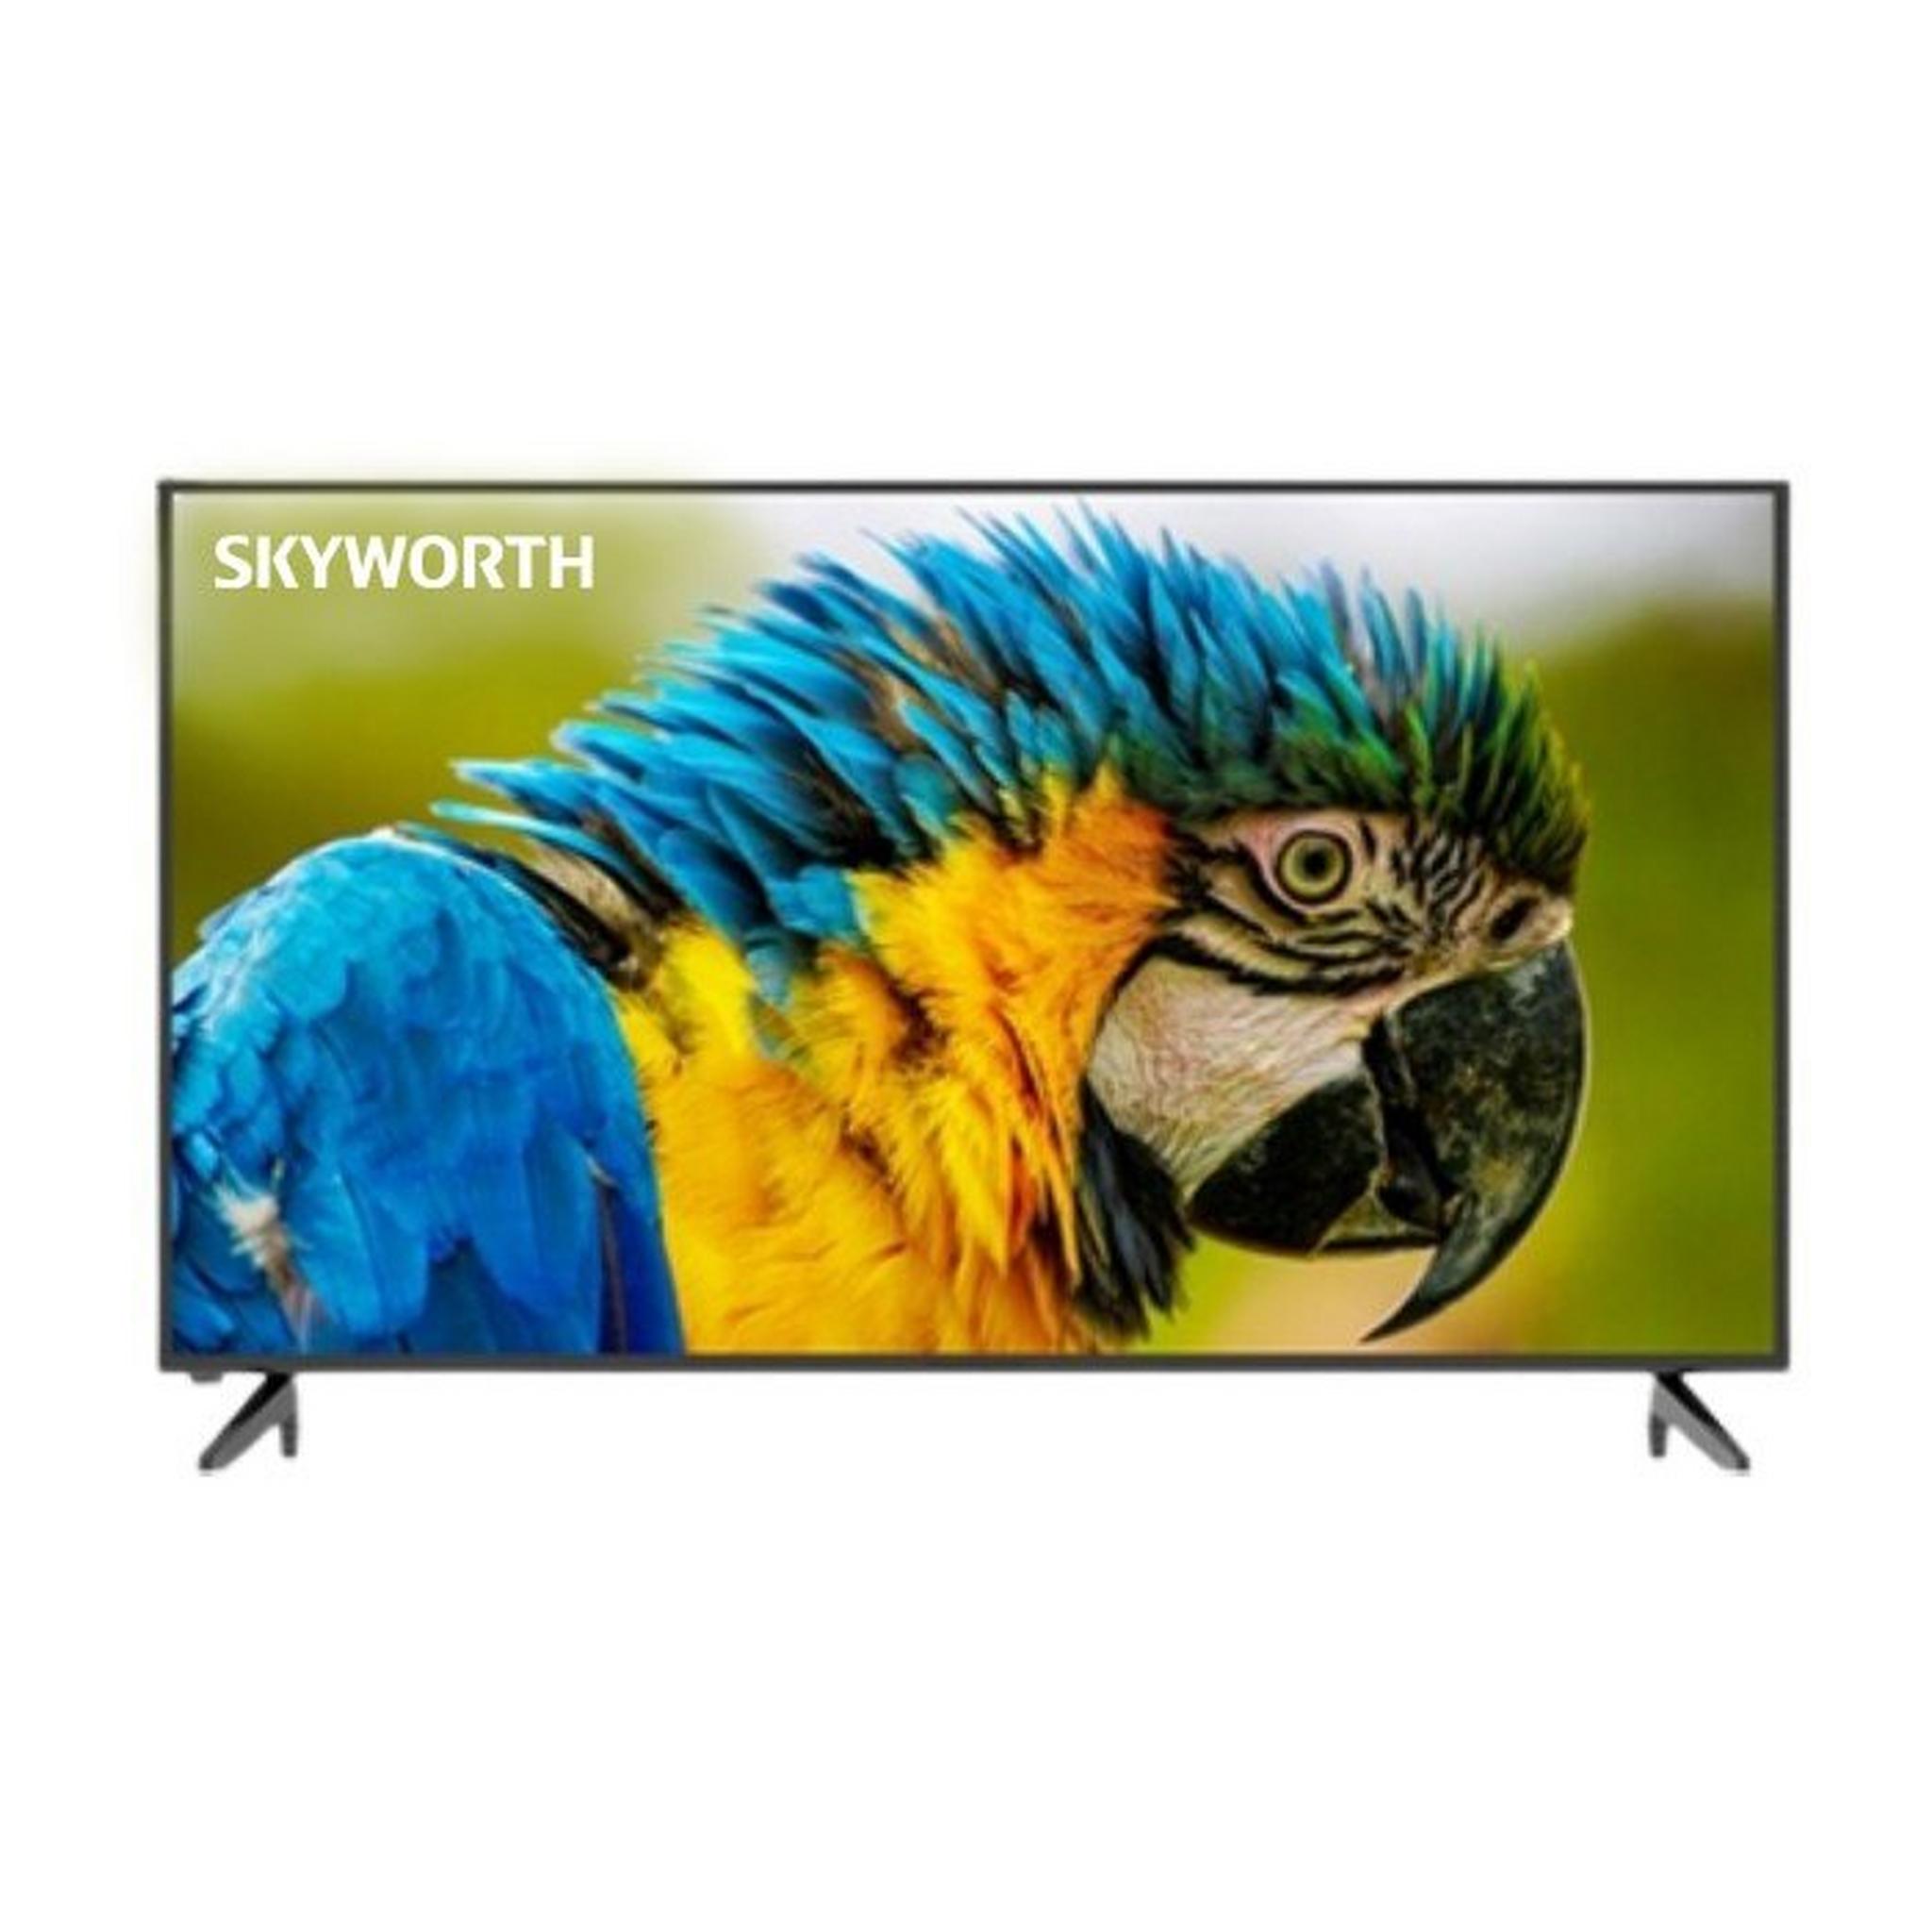 Skyworth 42-inch Android FHD LED TV (42STC6200)